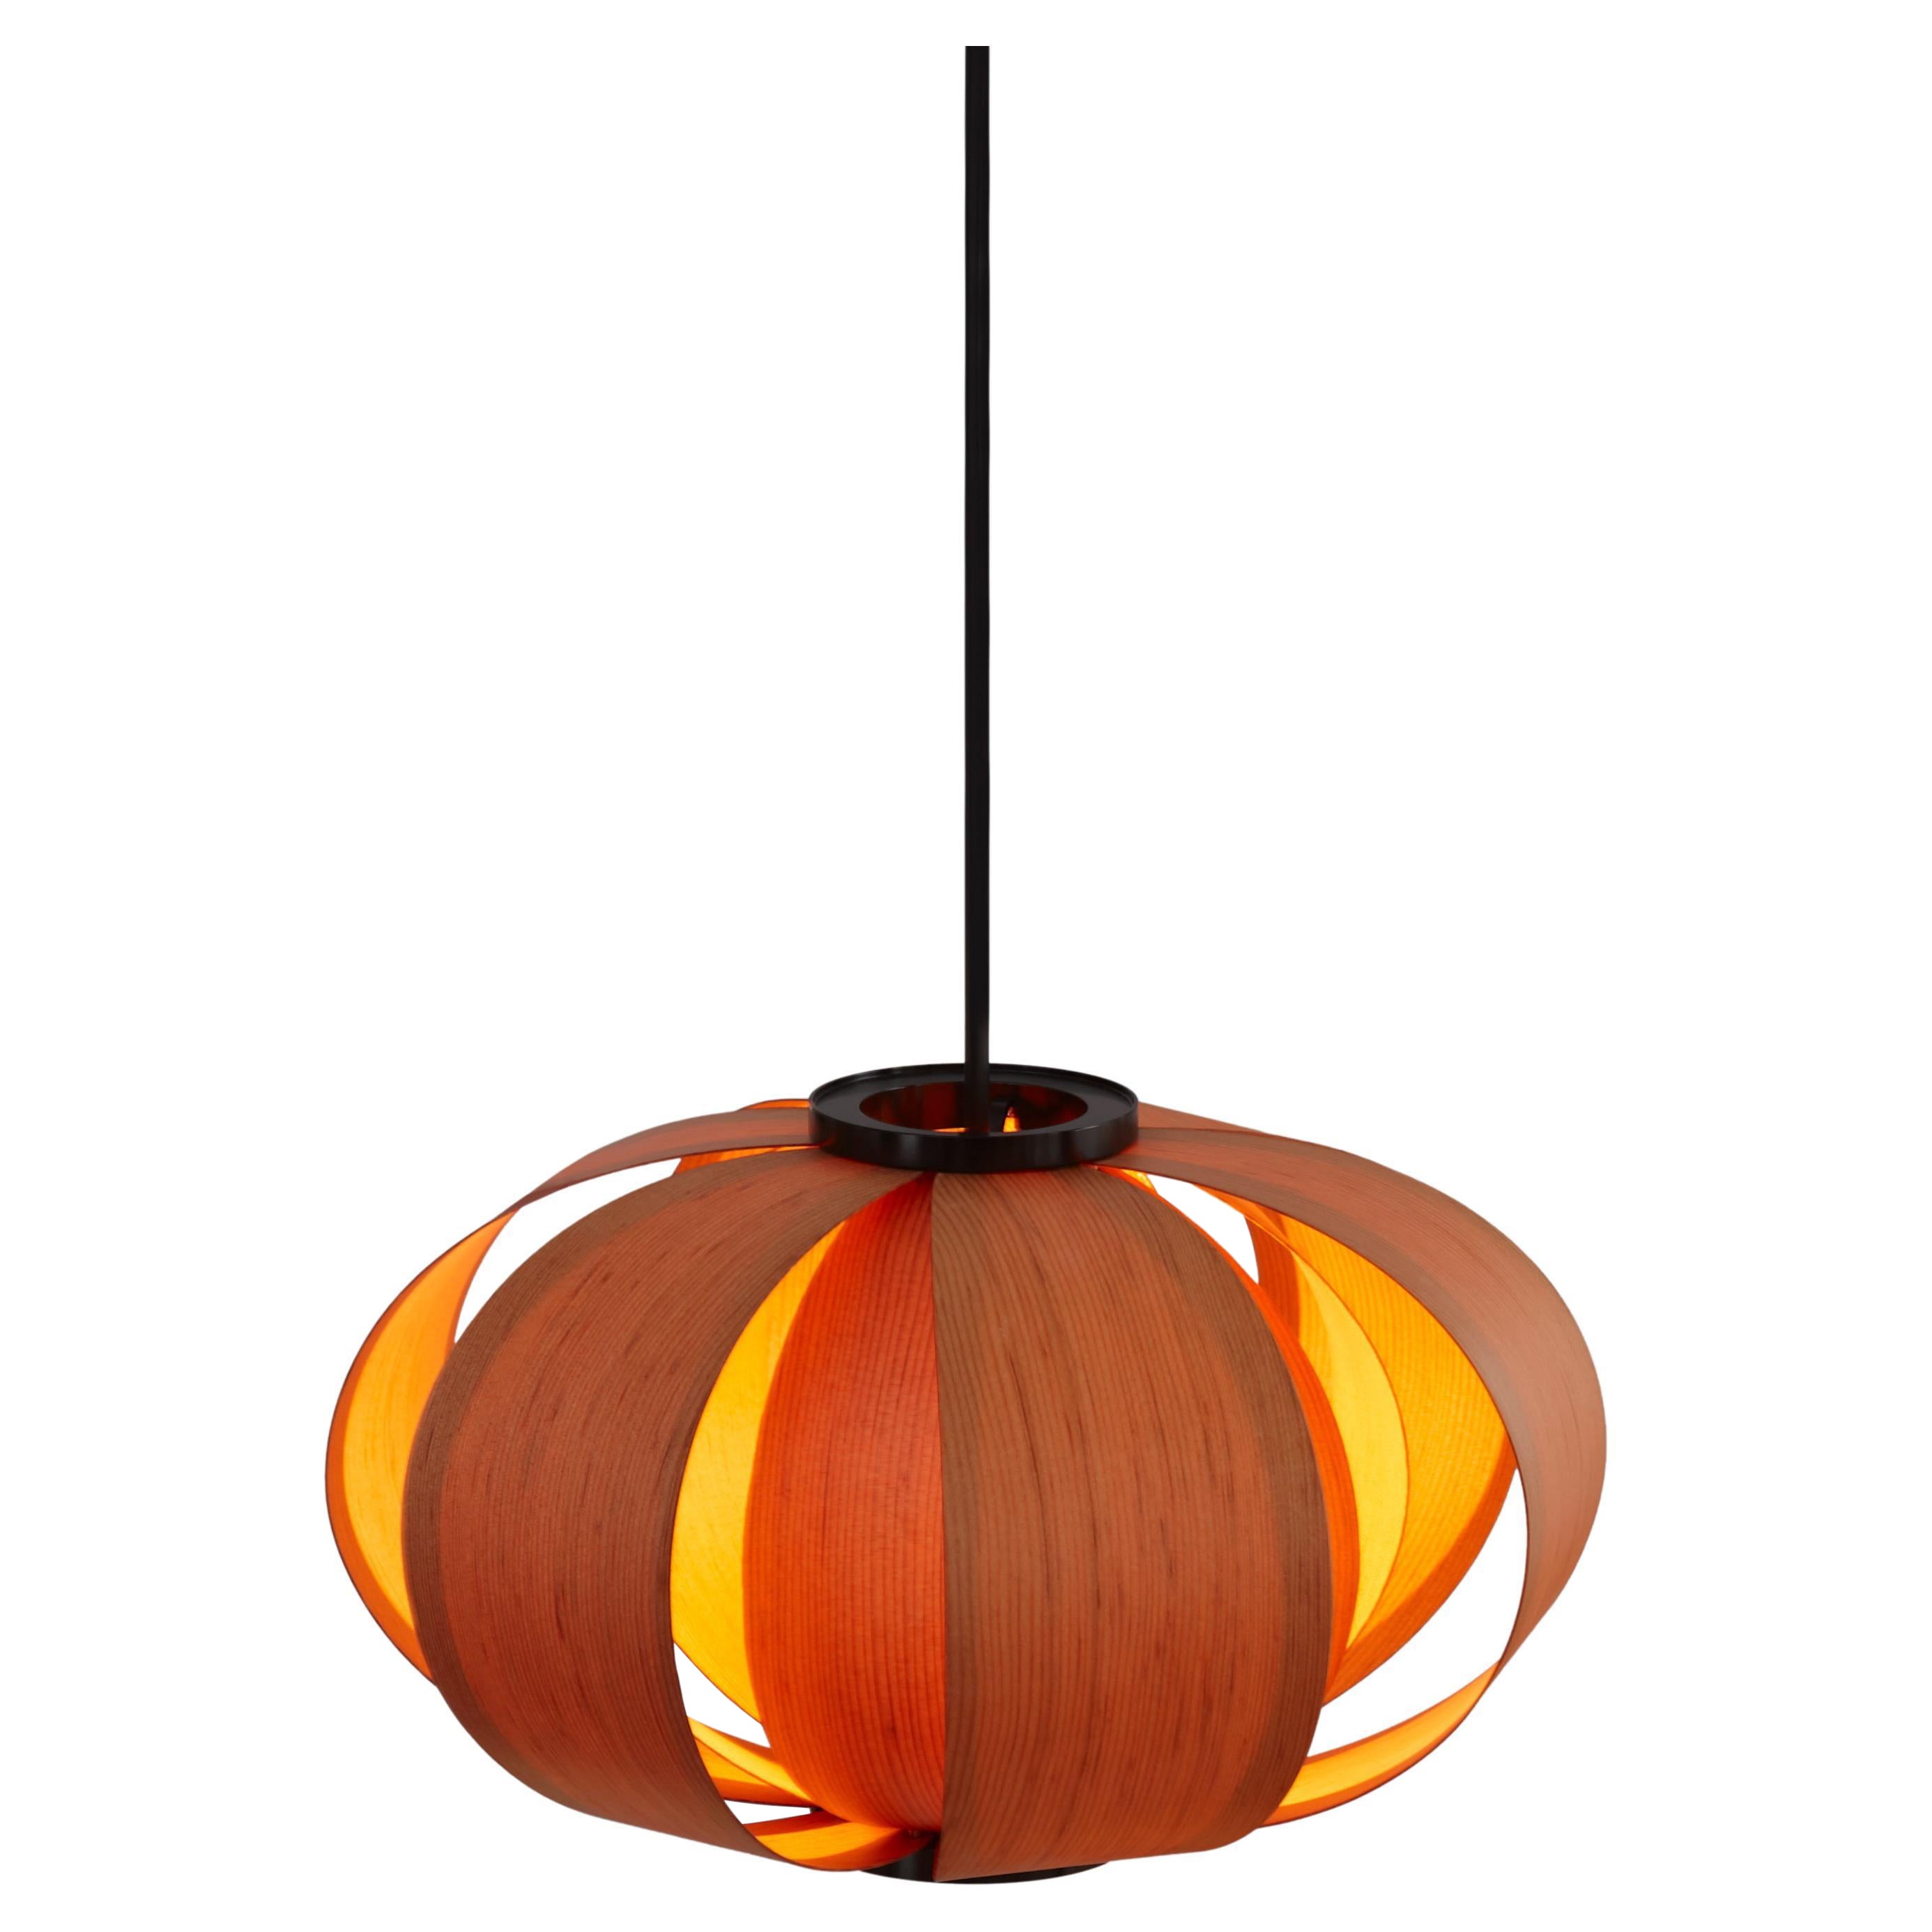 J. A. Coderch 'Disa Mini' Wood Suspension Lamp for Tunds For Sale